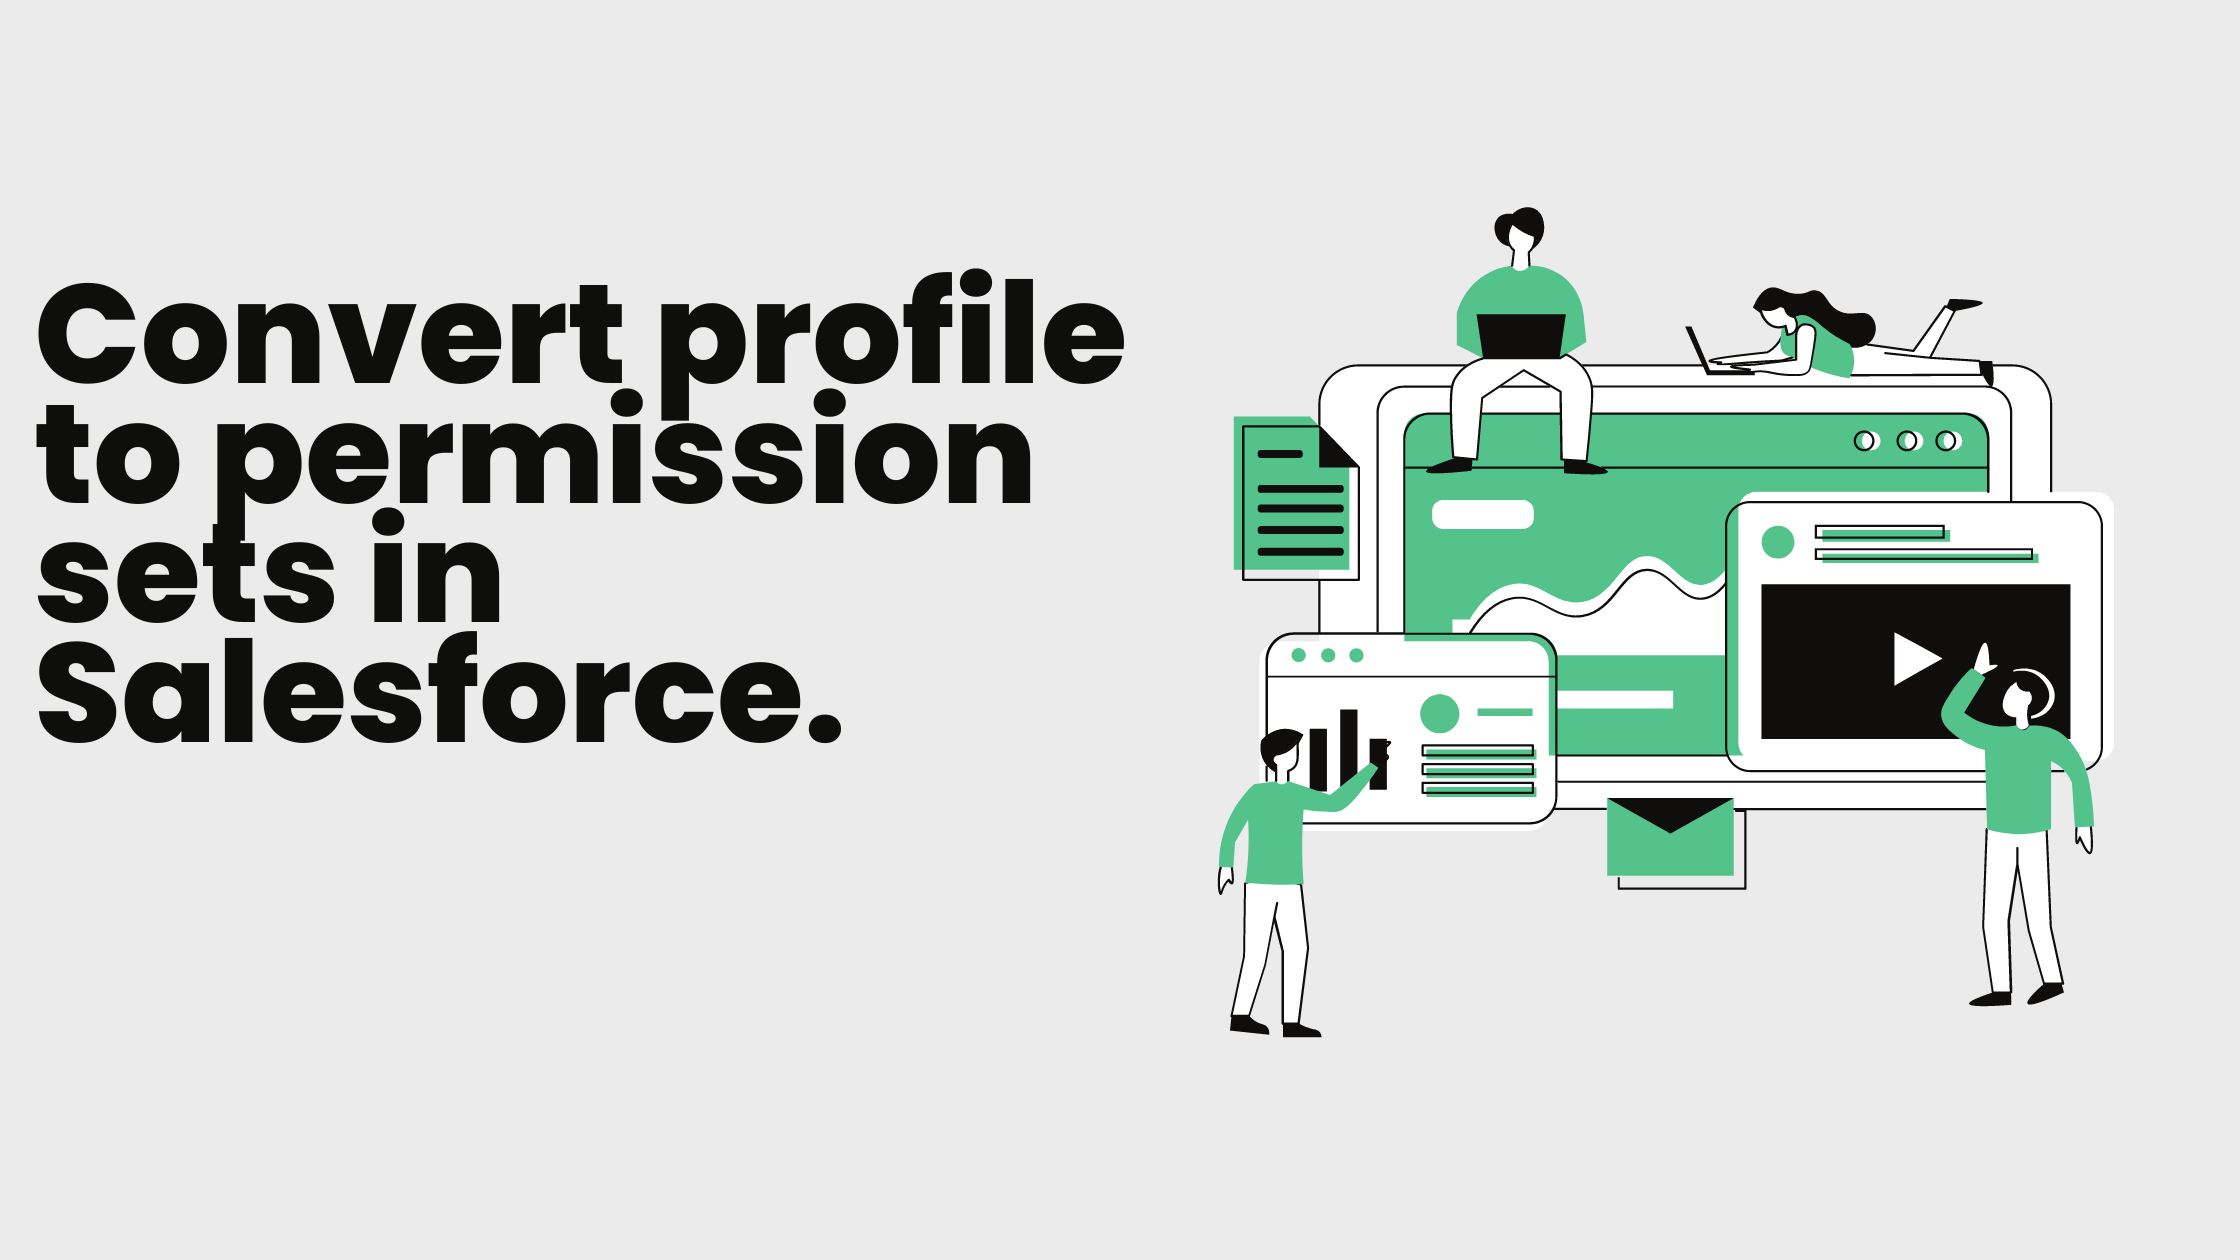 Convert profile to permission sets in Salesforce.